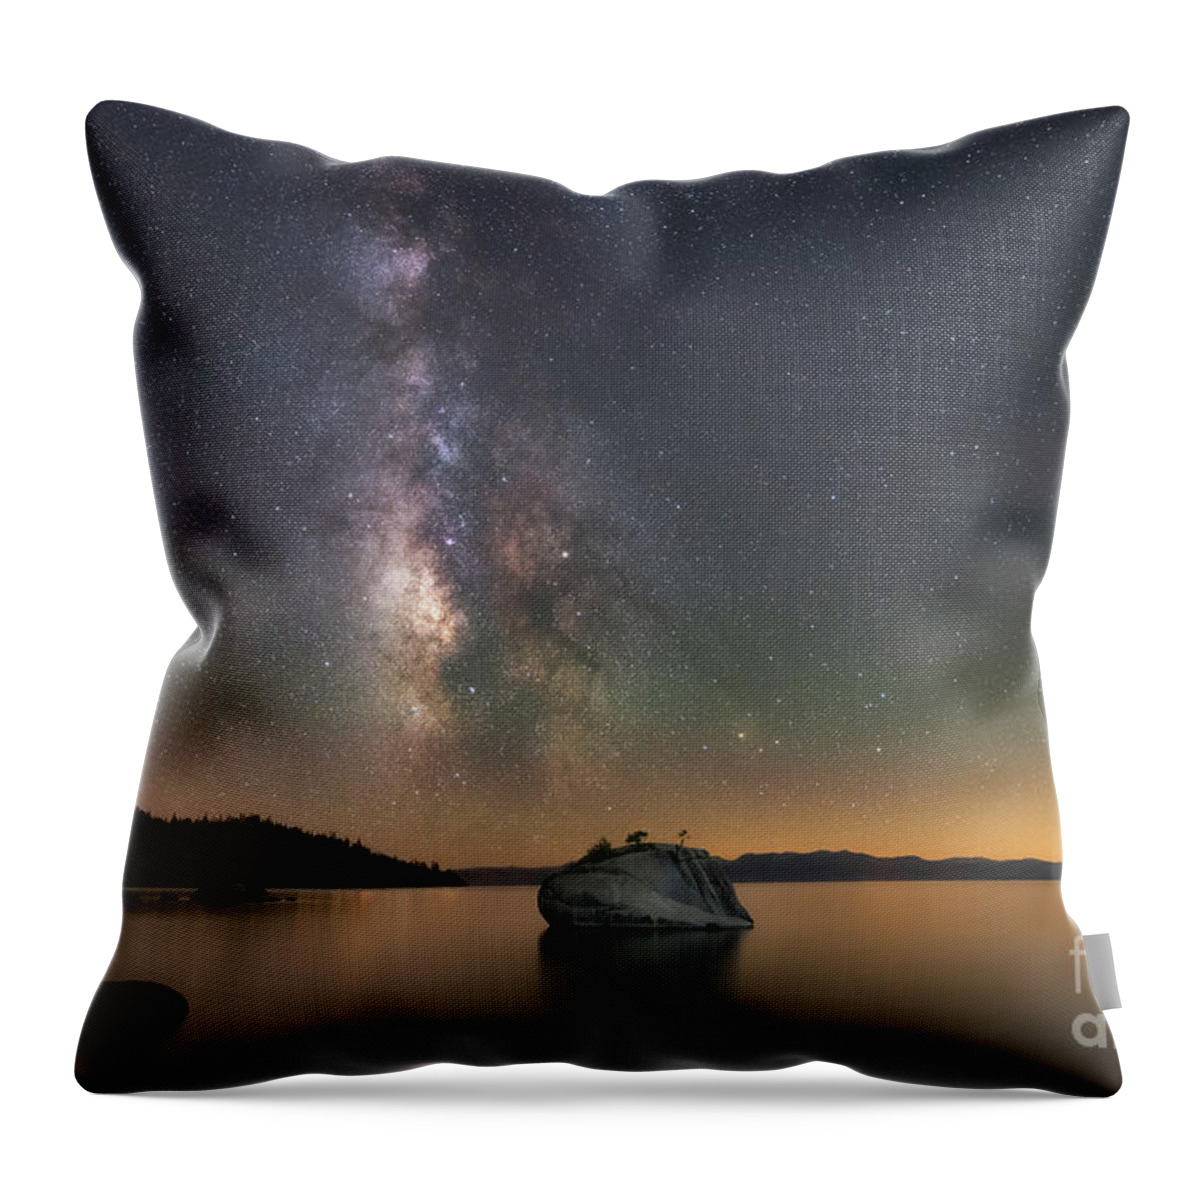 Bonsai Rock Throw Pillow featuring the photograph Lake Tahoe Milky Way by Michael Ver Sprill